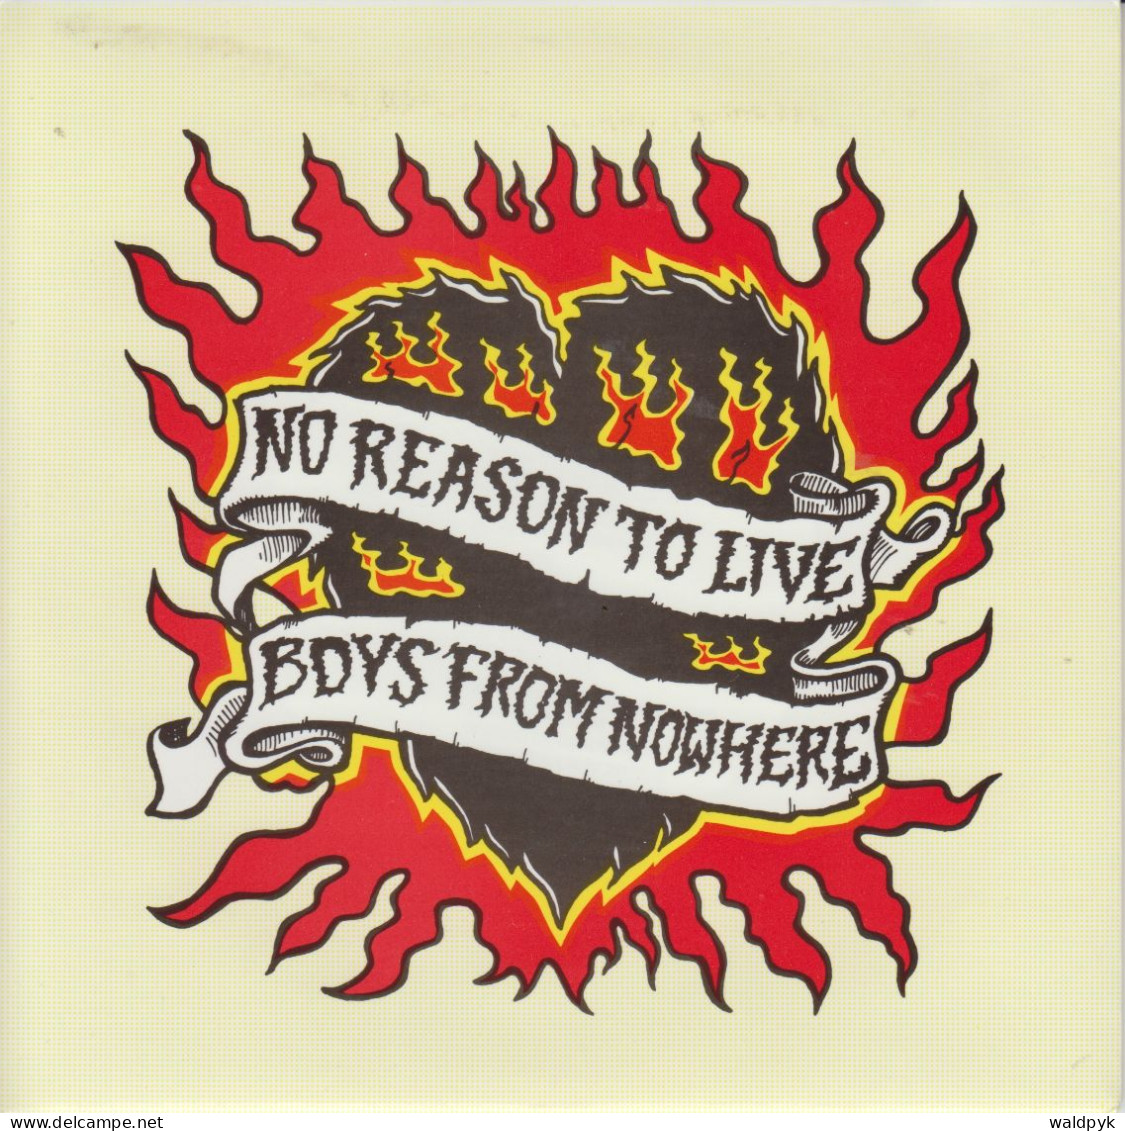 THE BOYS FROM NOWHERE - No Reason To Live - Other - English Music